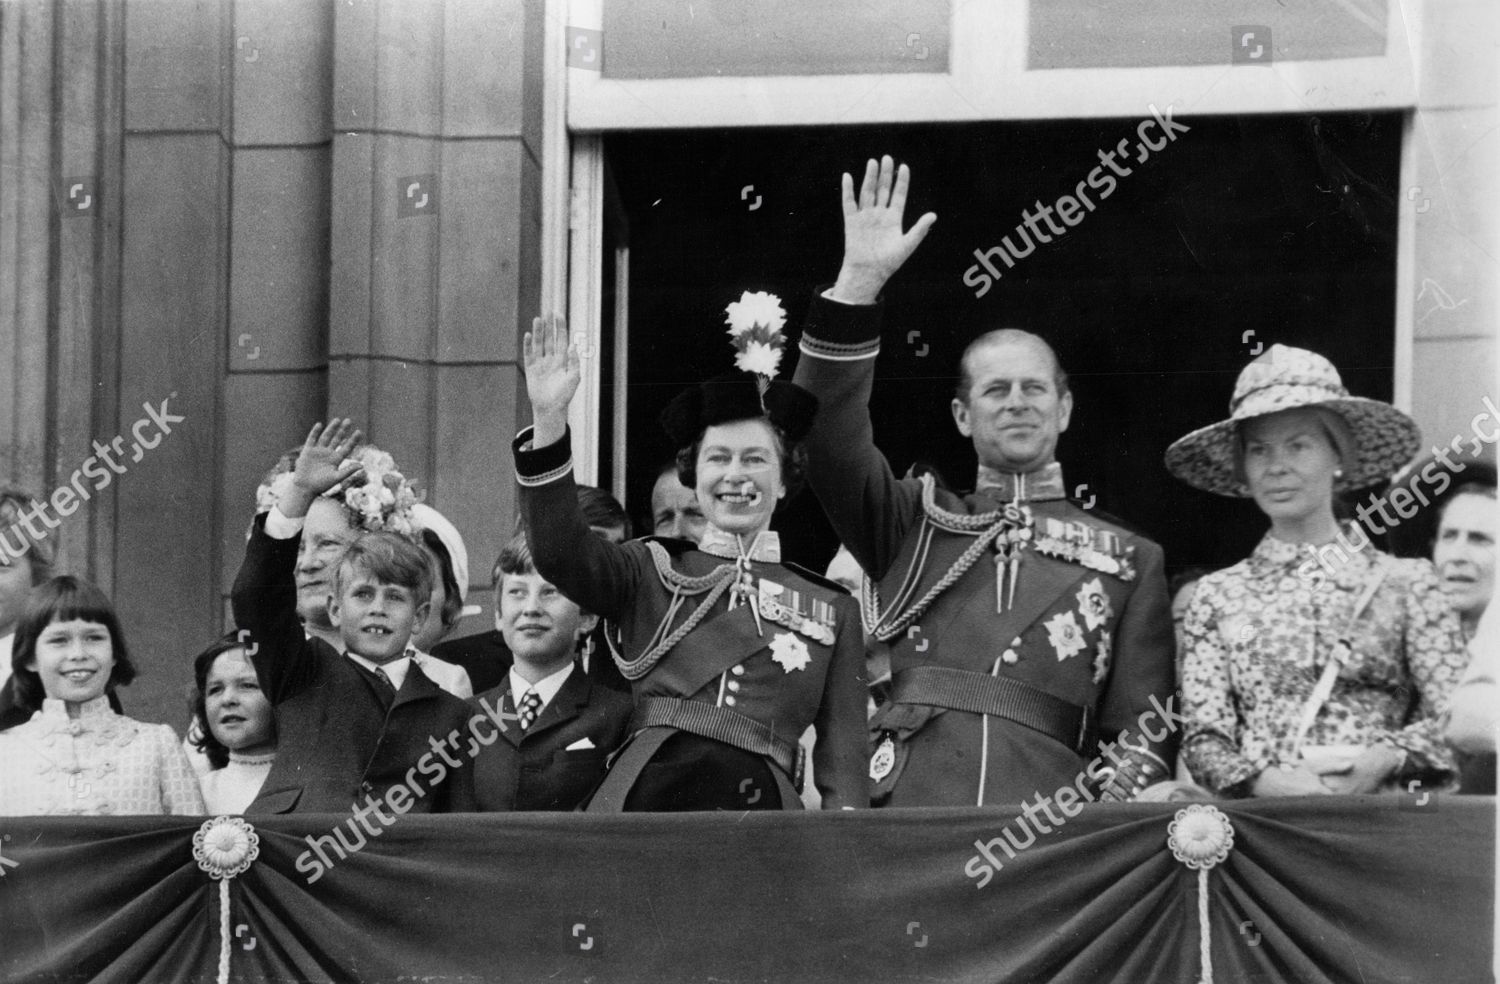 trooping-the-colour-1973-shows-queen-mother-prince-edward-queen-elizabeth-ii-prince-philip-and-duchess-of-kent-on-balcony-at-buckingham-palace-shutterstock-editorial-1353499a.jpg